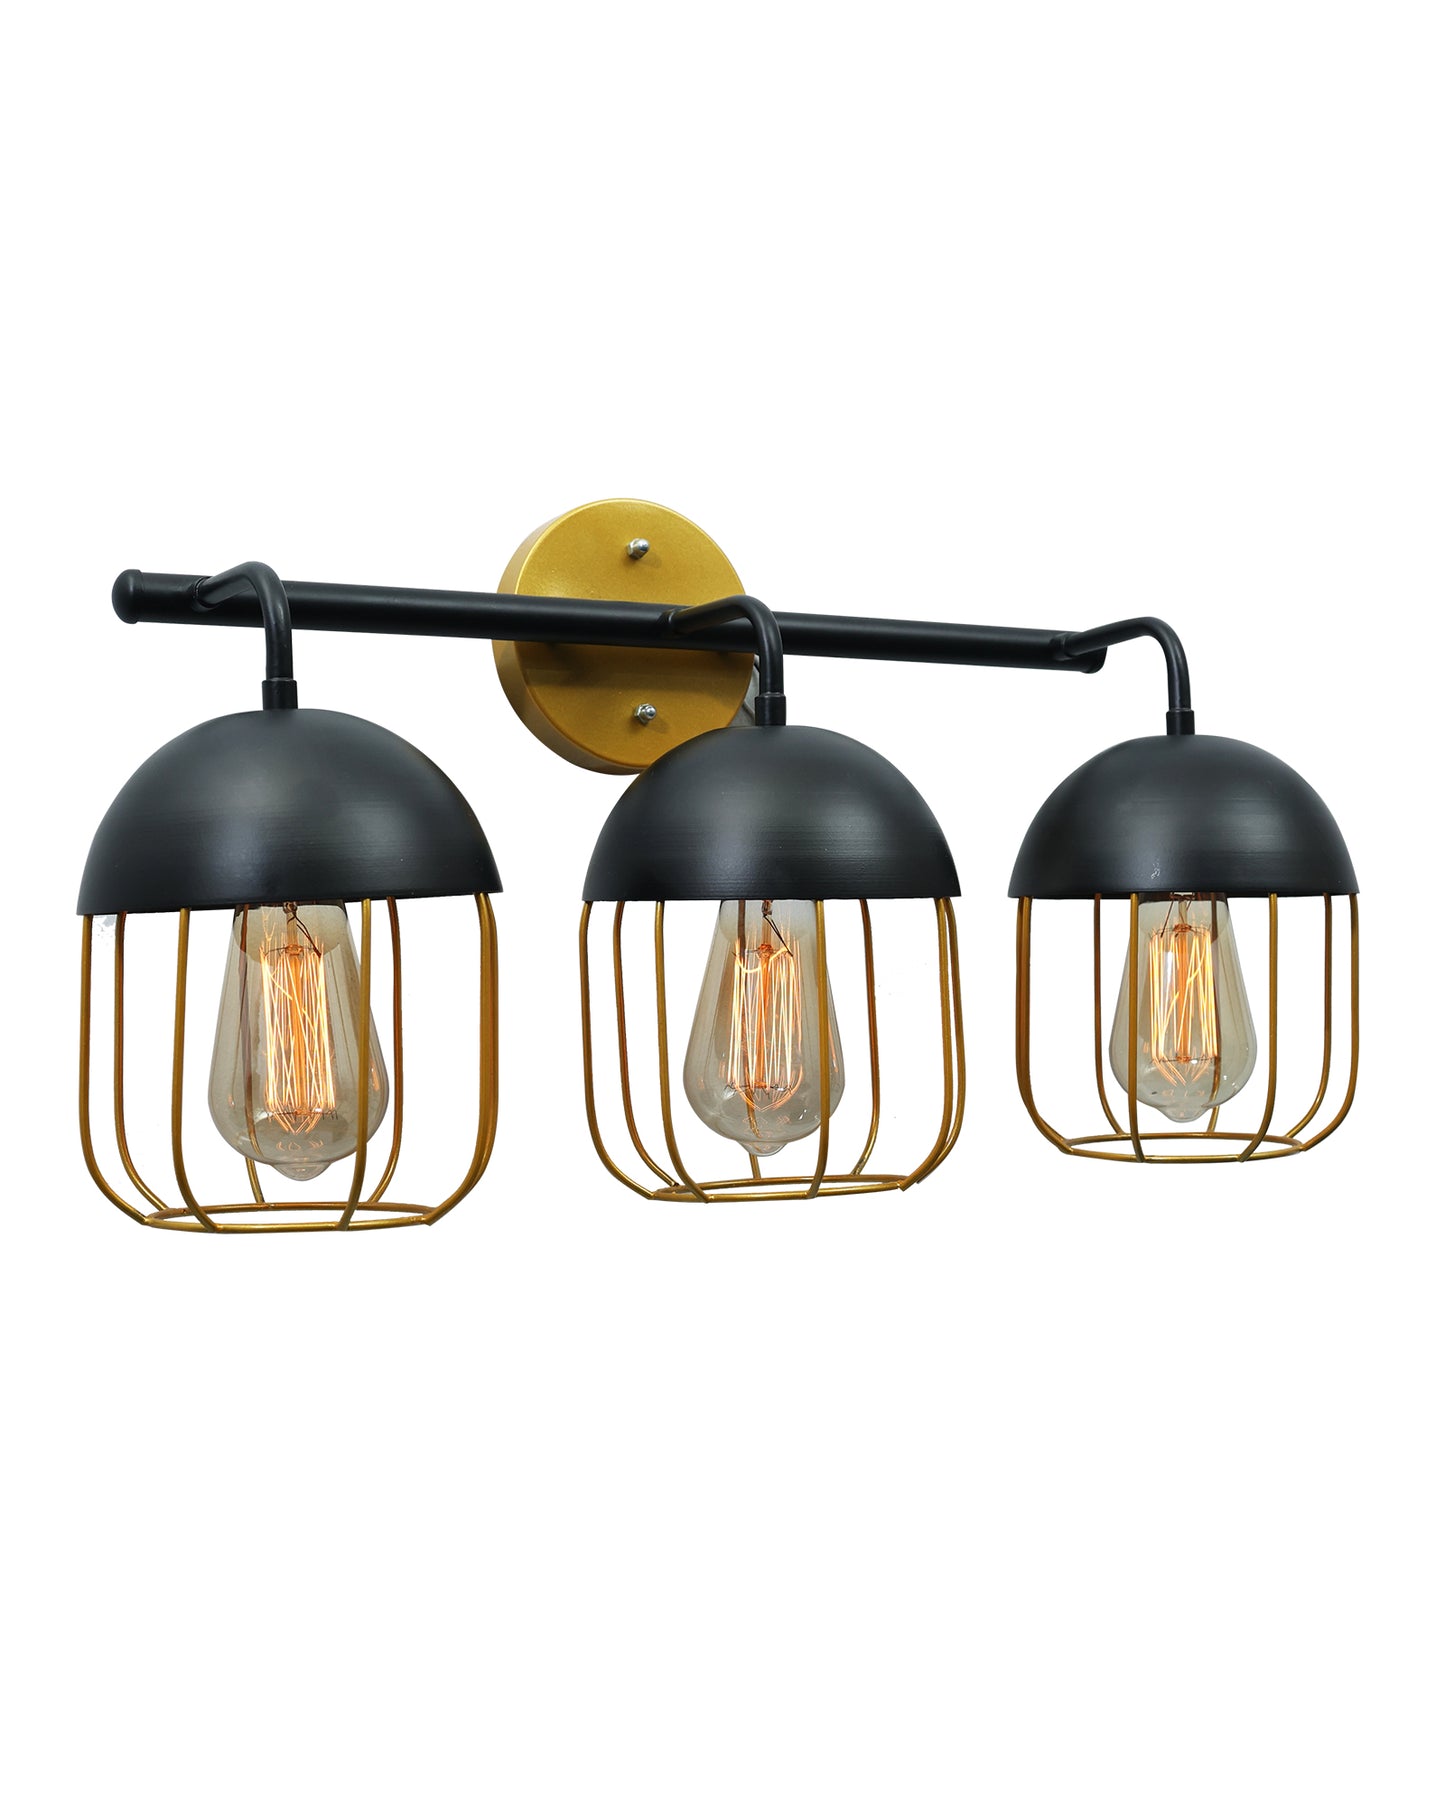 Cage Wall Sconce,Modern Bathroom Wall Light Fixtures 3 Light Bathroom Vanity Light, Fixture for Bathroom Lights Over Mirror, Farmhouse Black and Gold